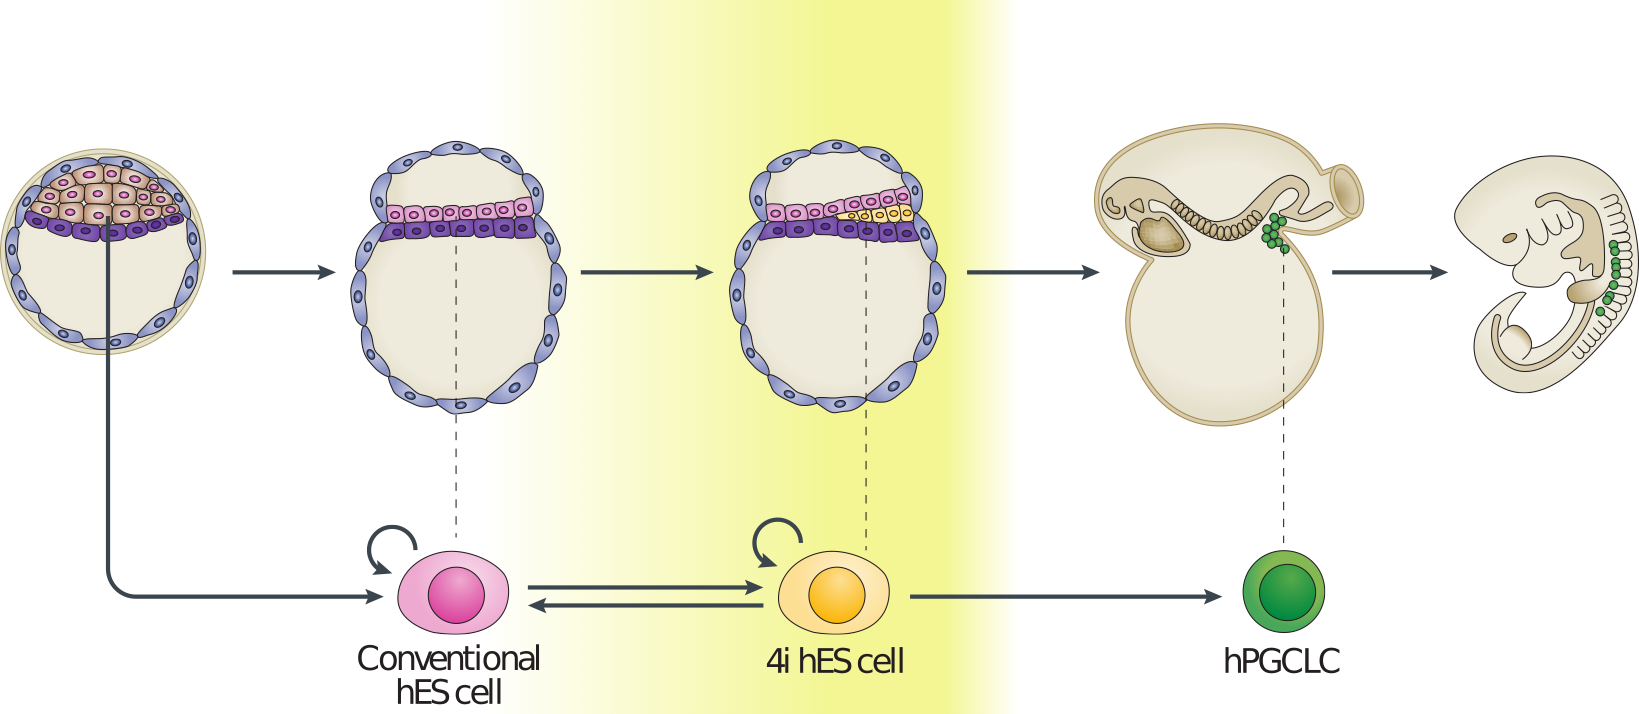 Example of early human development. Here we have measurements of cells from preimplantation embryos, embryonic stem cells, and from post-implantation primordial germ cells and somatic tissues.